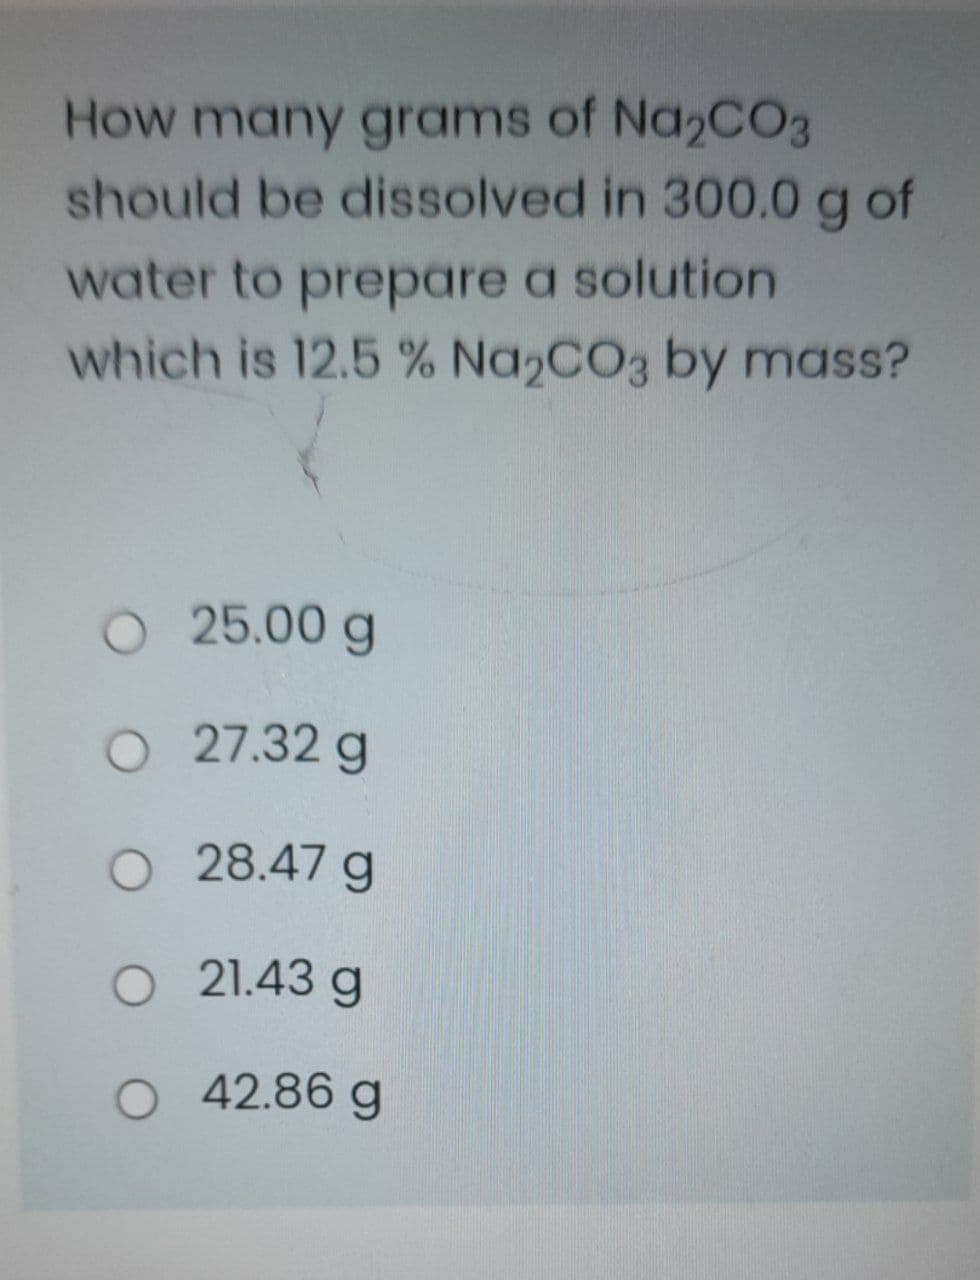 How many grams of Na2CO3
should be dissolved in 300.0g of
water to prepare a solution
which is 12.5 % Na2CO3 by mass?
O 25.00 g
O 27.32 g
O 28.47 g
O 21.43 g
O 42.86 g
